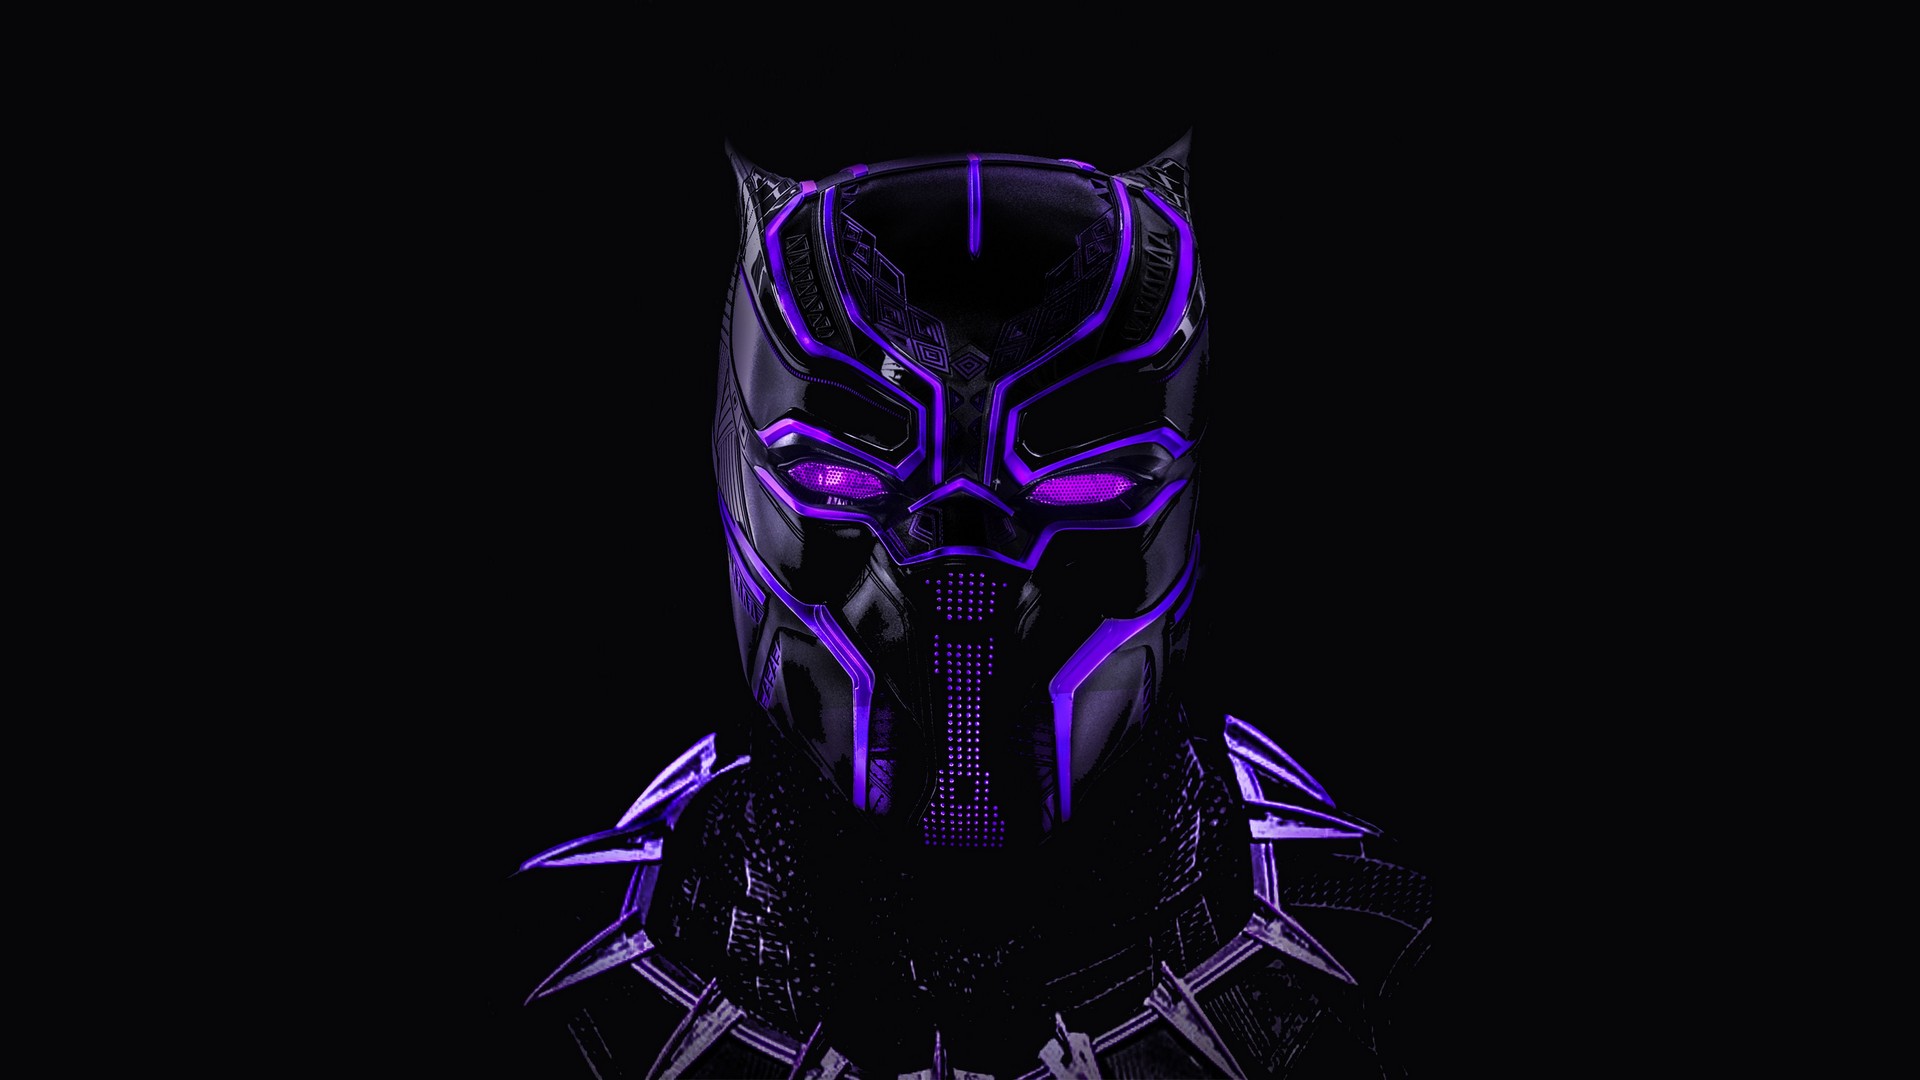 Black Panther Poster HD Wallpaper with high-resolution 1920x1080 pixel. You can use this poster wallpaper for your Desktop Computers, Mac Screensavers, Windows Backgrounds, iPhone Wallpapers, Tablet or Android Lock screen and another Mobile device